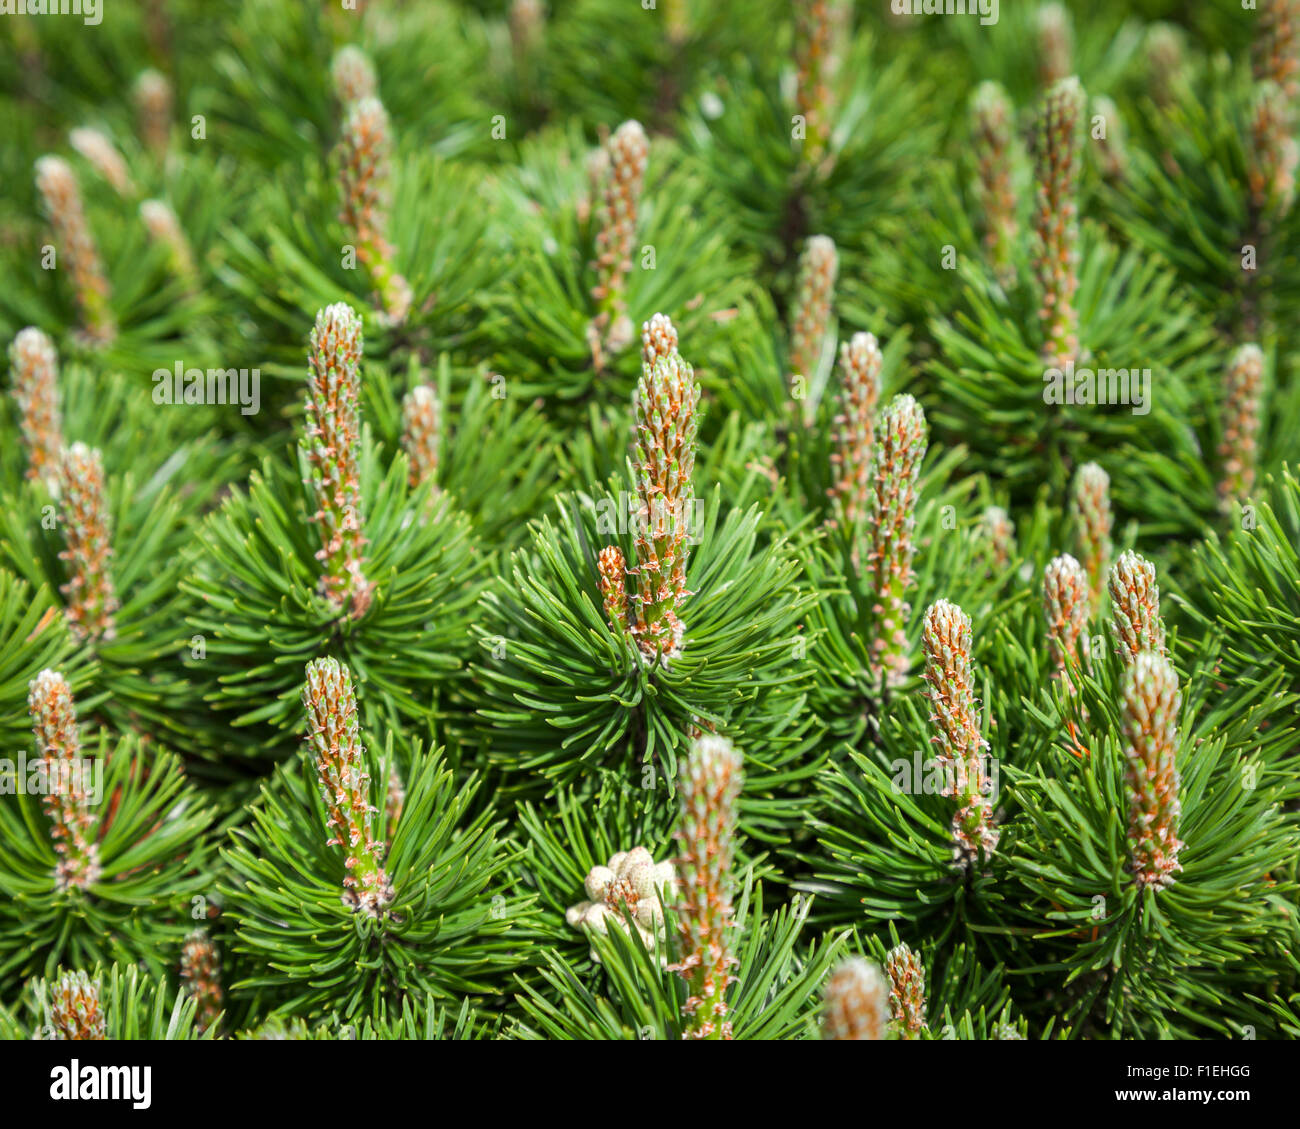 Pine and pine cones close up Stock Photo